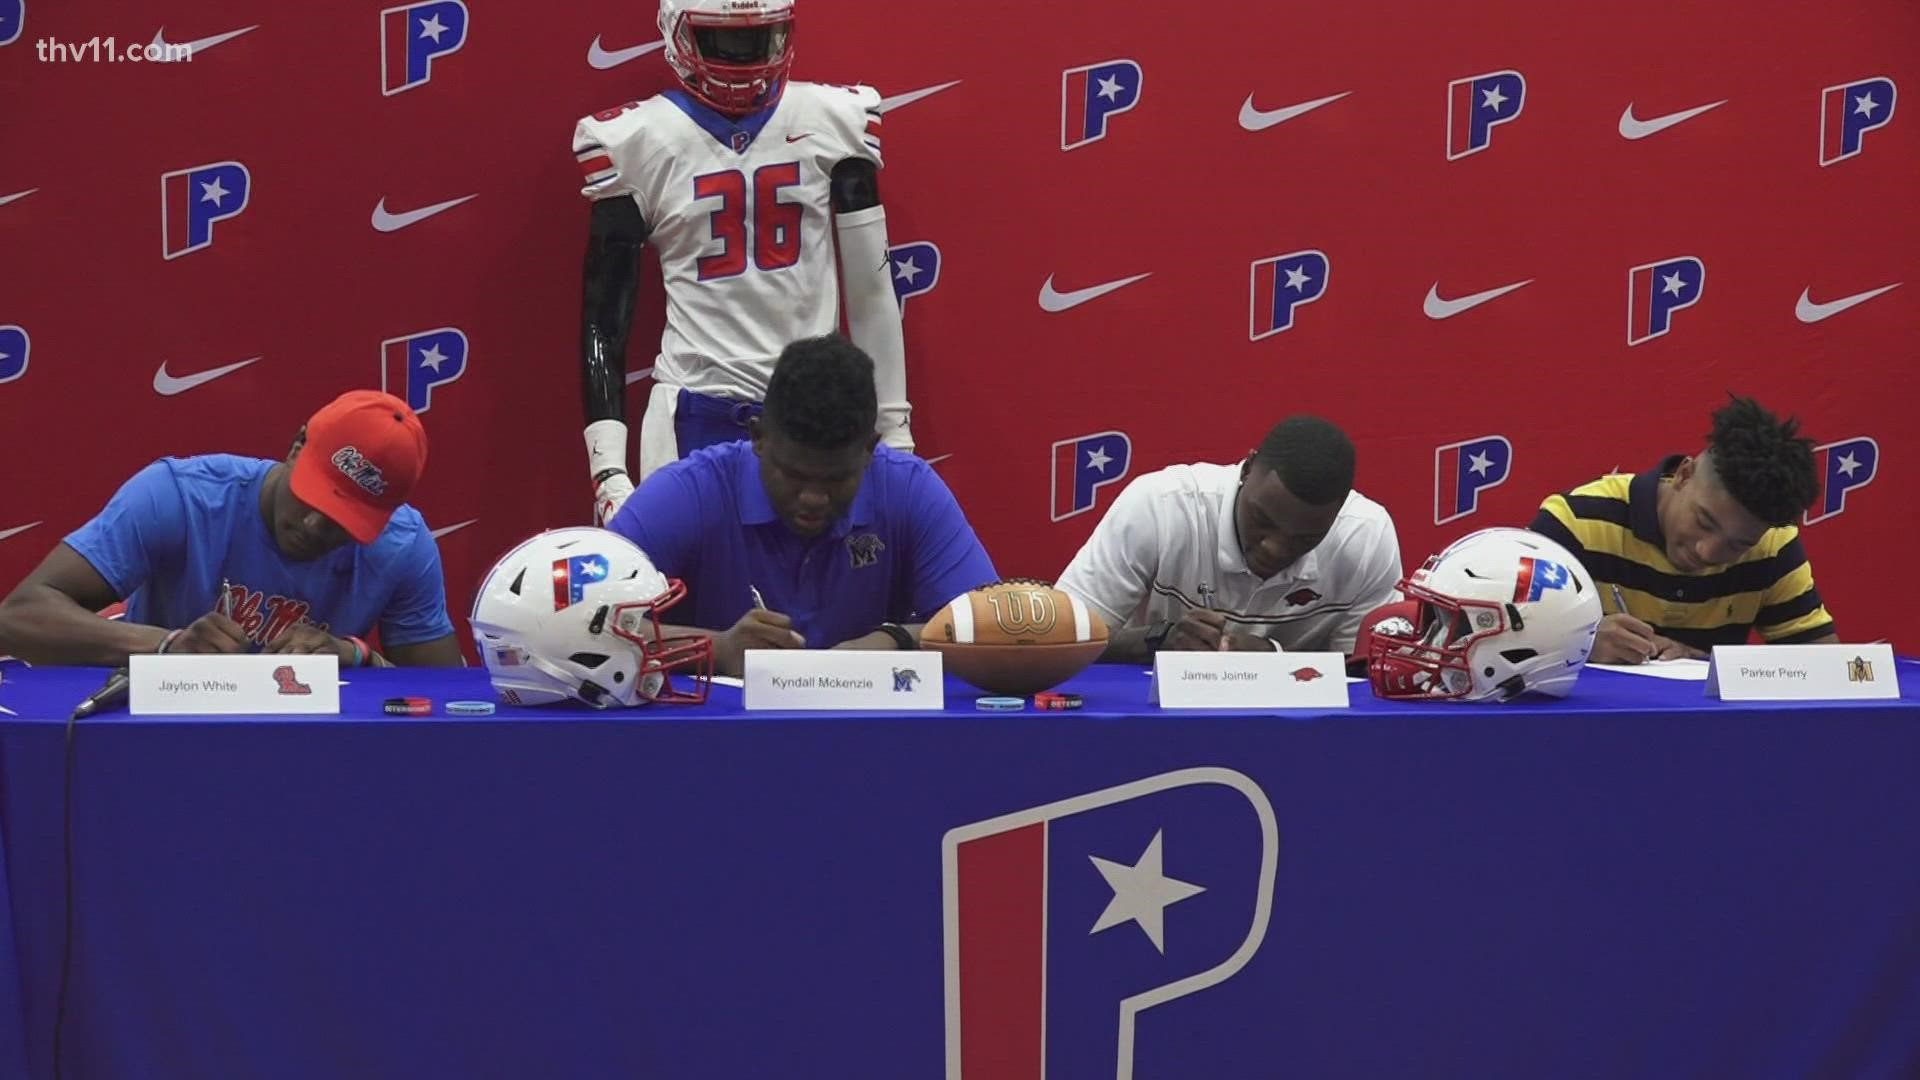 It was a busy signing day at LR Parkview.